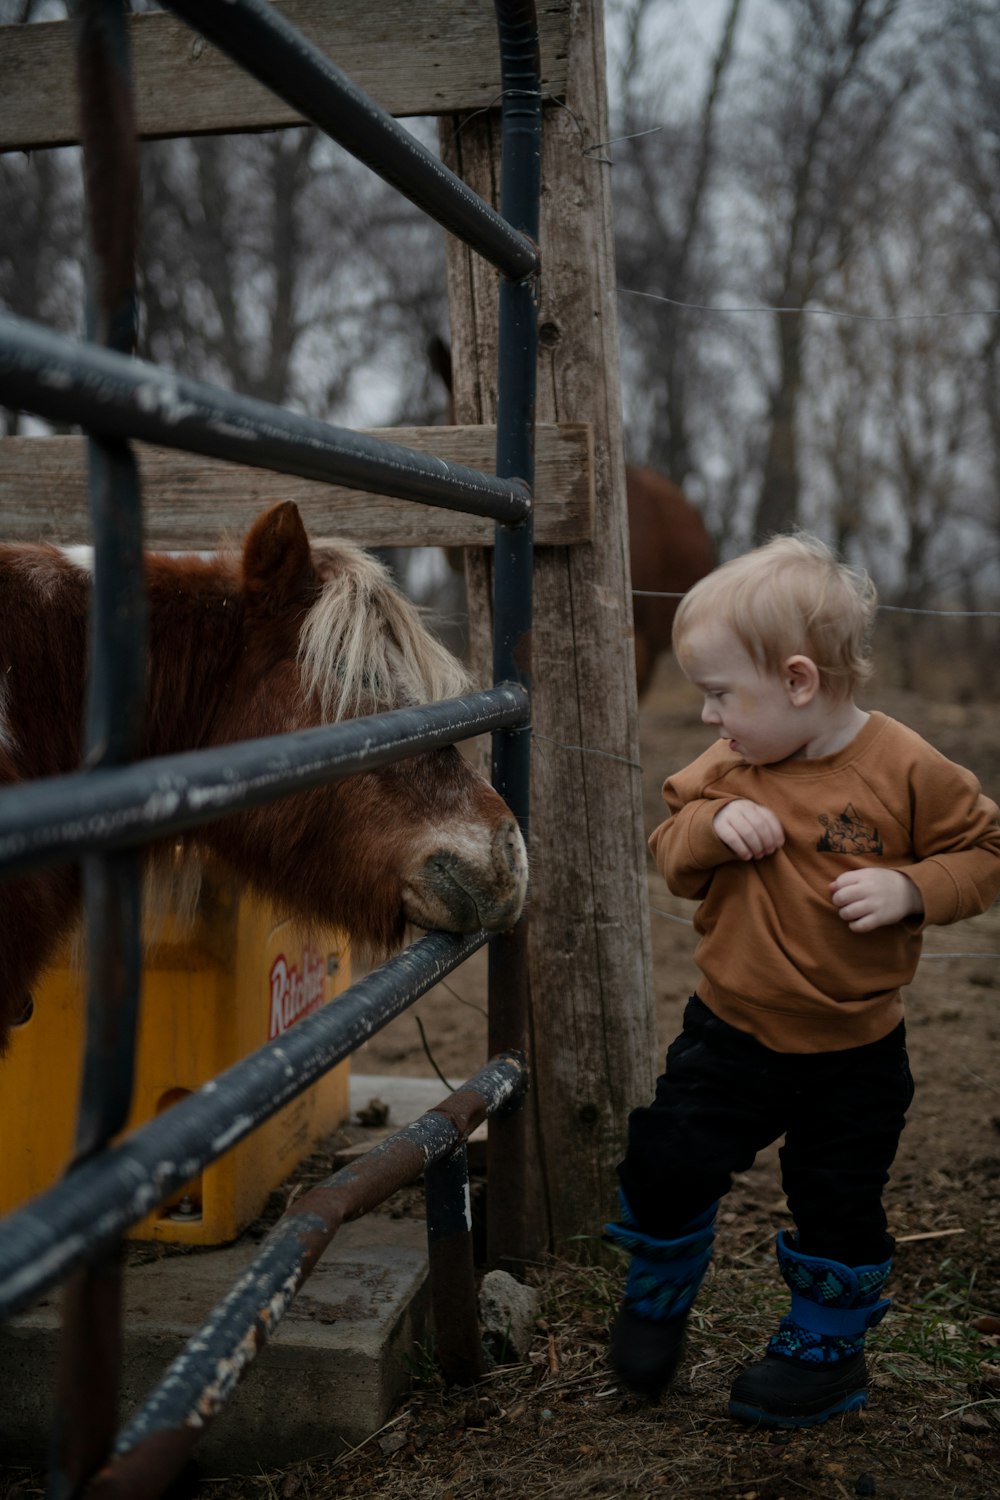 a little boy standing next to a brown and white horse